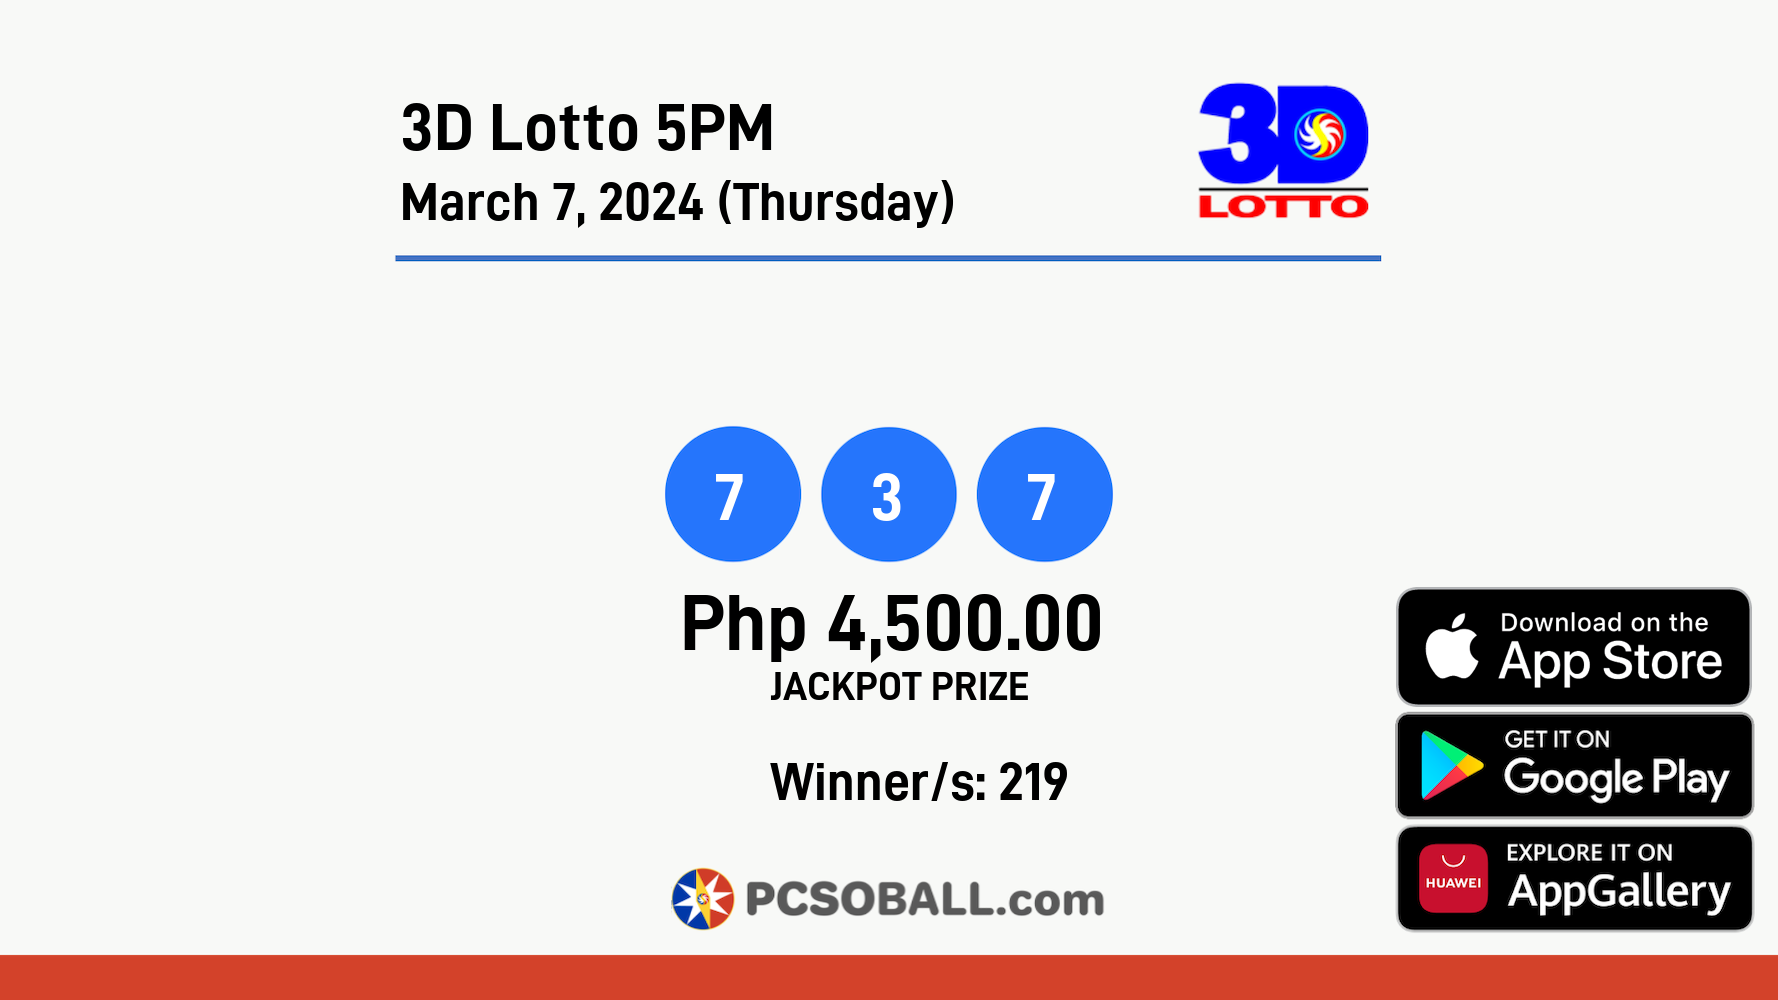 3D Lotto 5PM March 7, 2024 (Thursday) Result